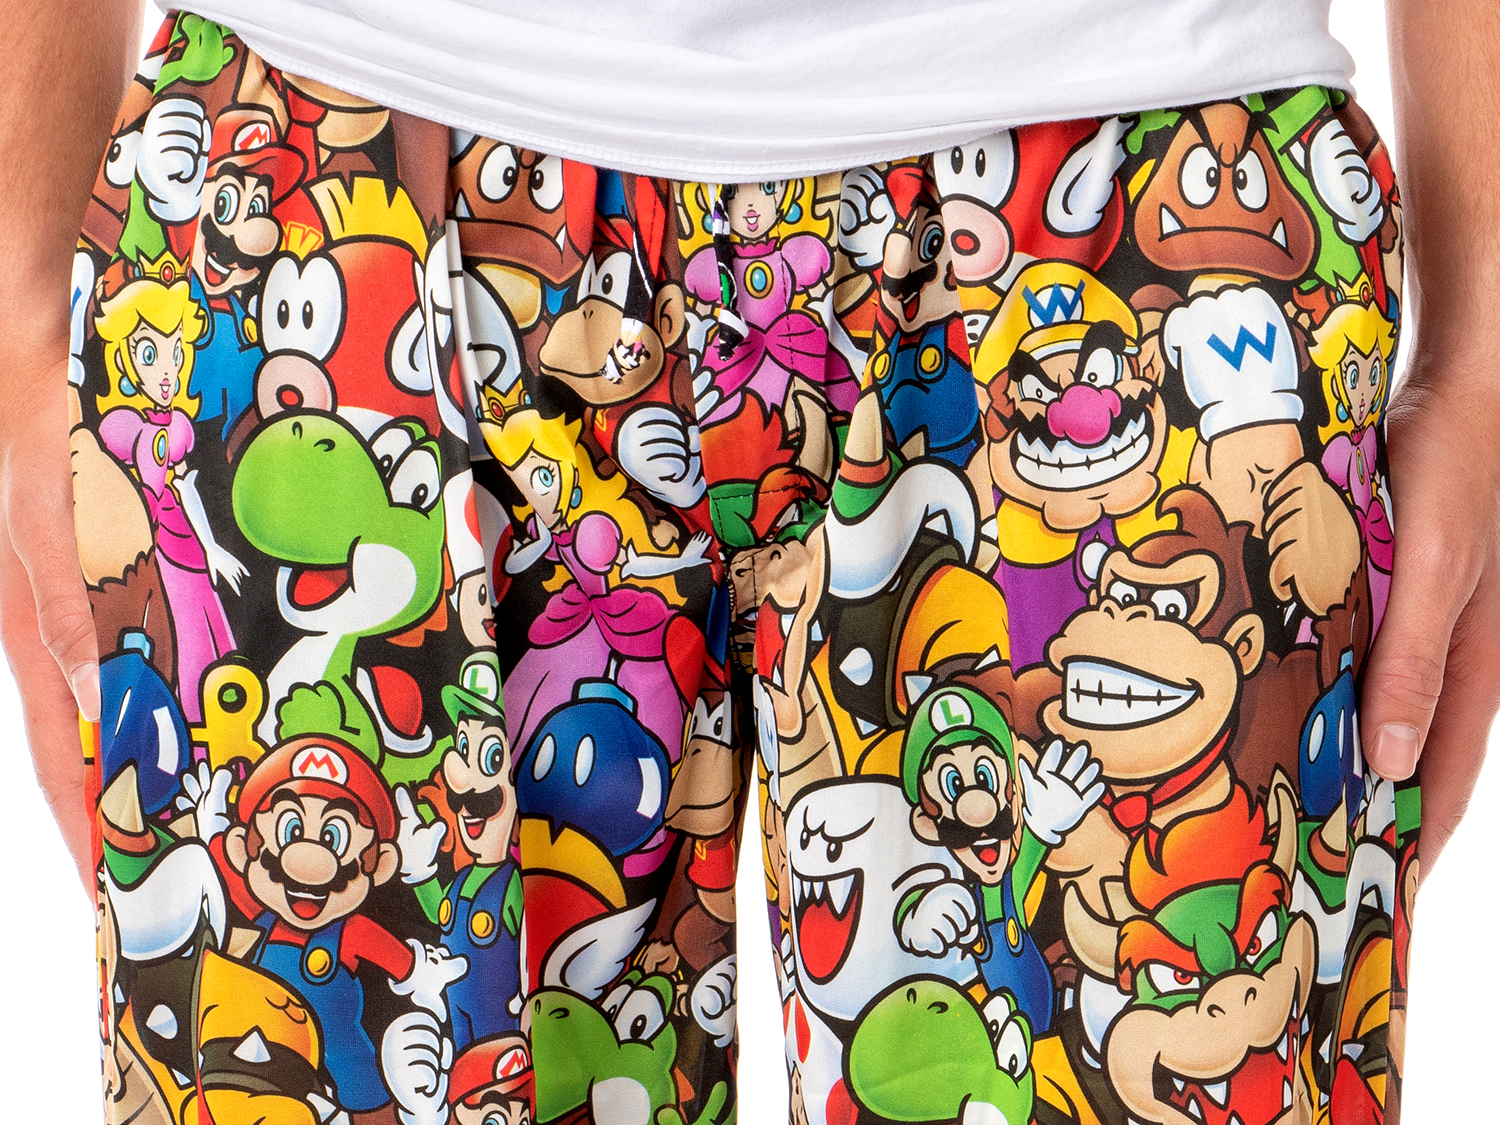 Seven Times Six Nintendo Men's Super Mario Character Collage Soft Polyester Pajama Pants